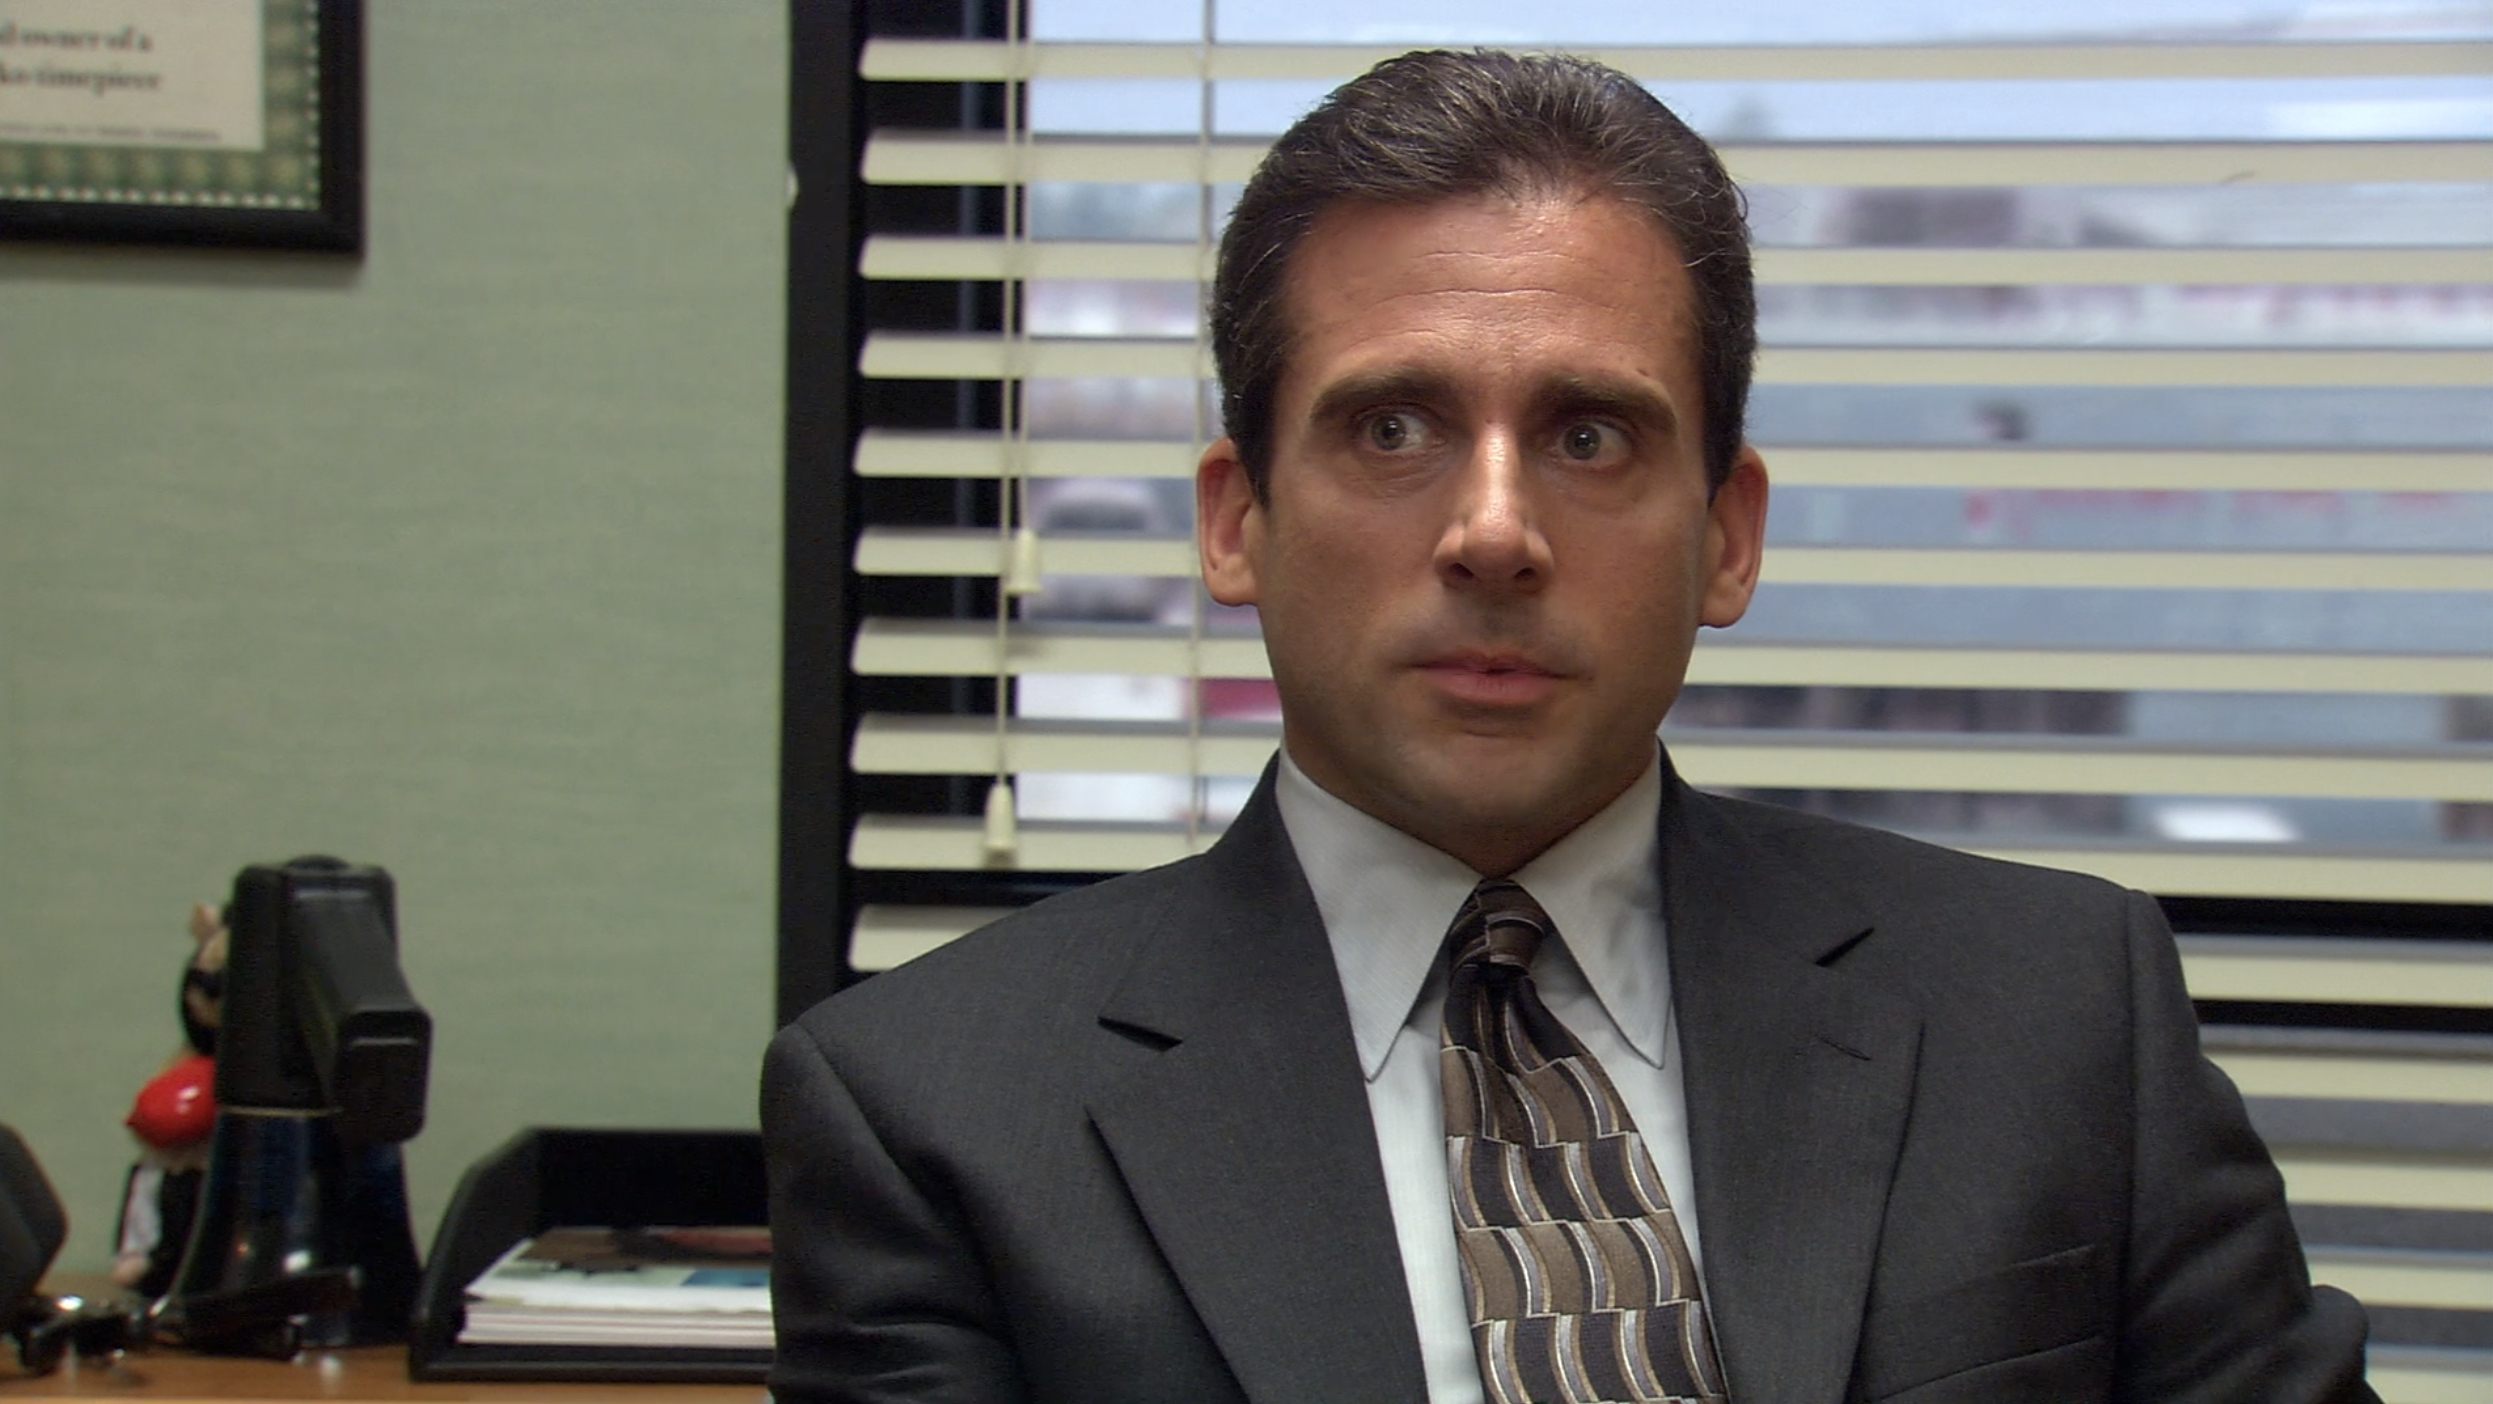 michael scott with fuller hair on the office